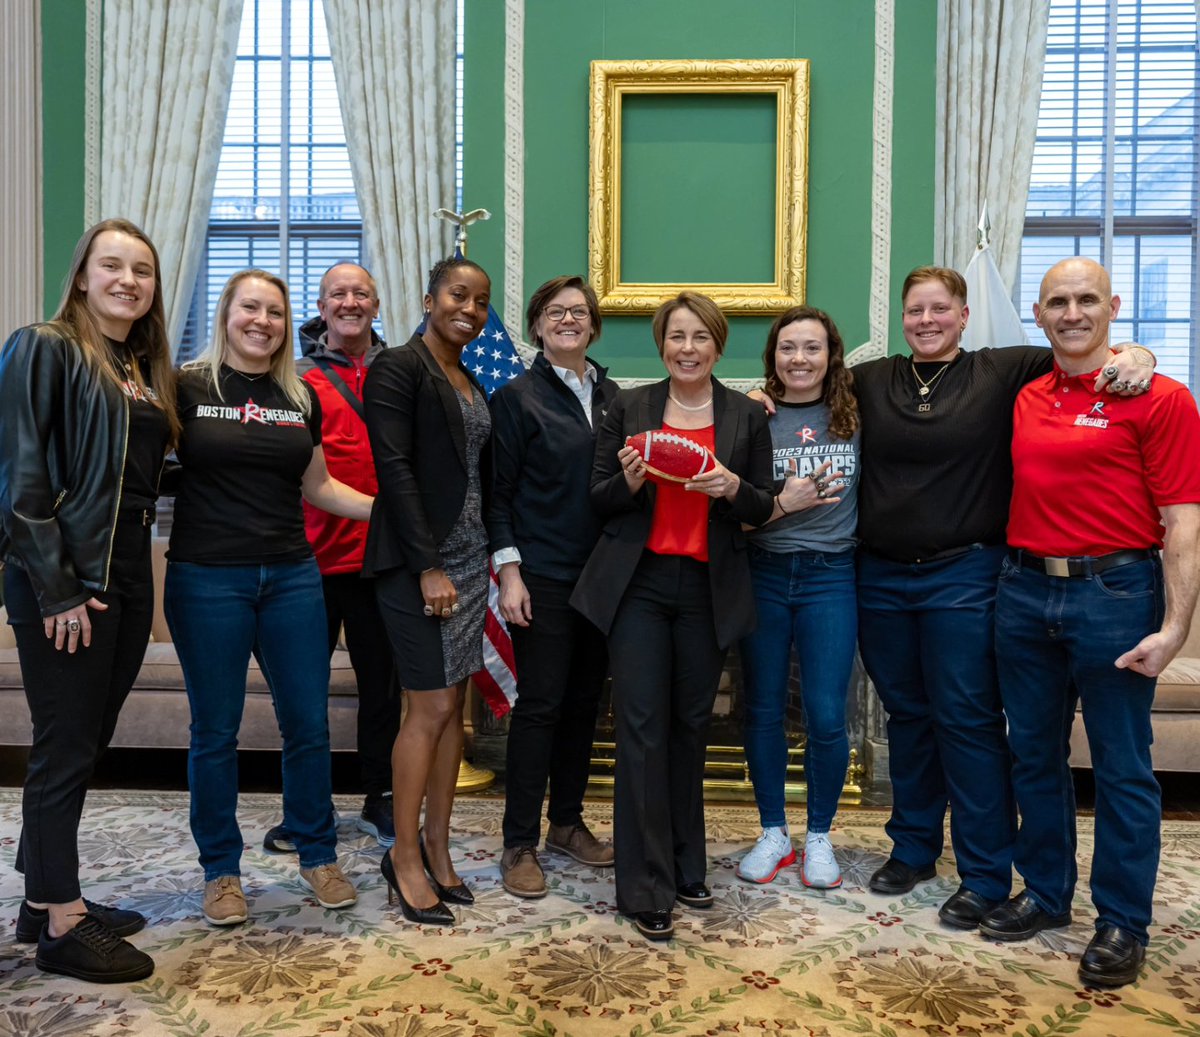 Celebrating this #InternationalWomensDay w/ a big thank you to @massgovernor, Maura Healey. Not only was I able to give her an autographed copy of a New England Patriots @blitzchampz card game, but my @bostonrenegades teammates and I were given an amazing tour of the State House